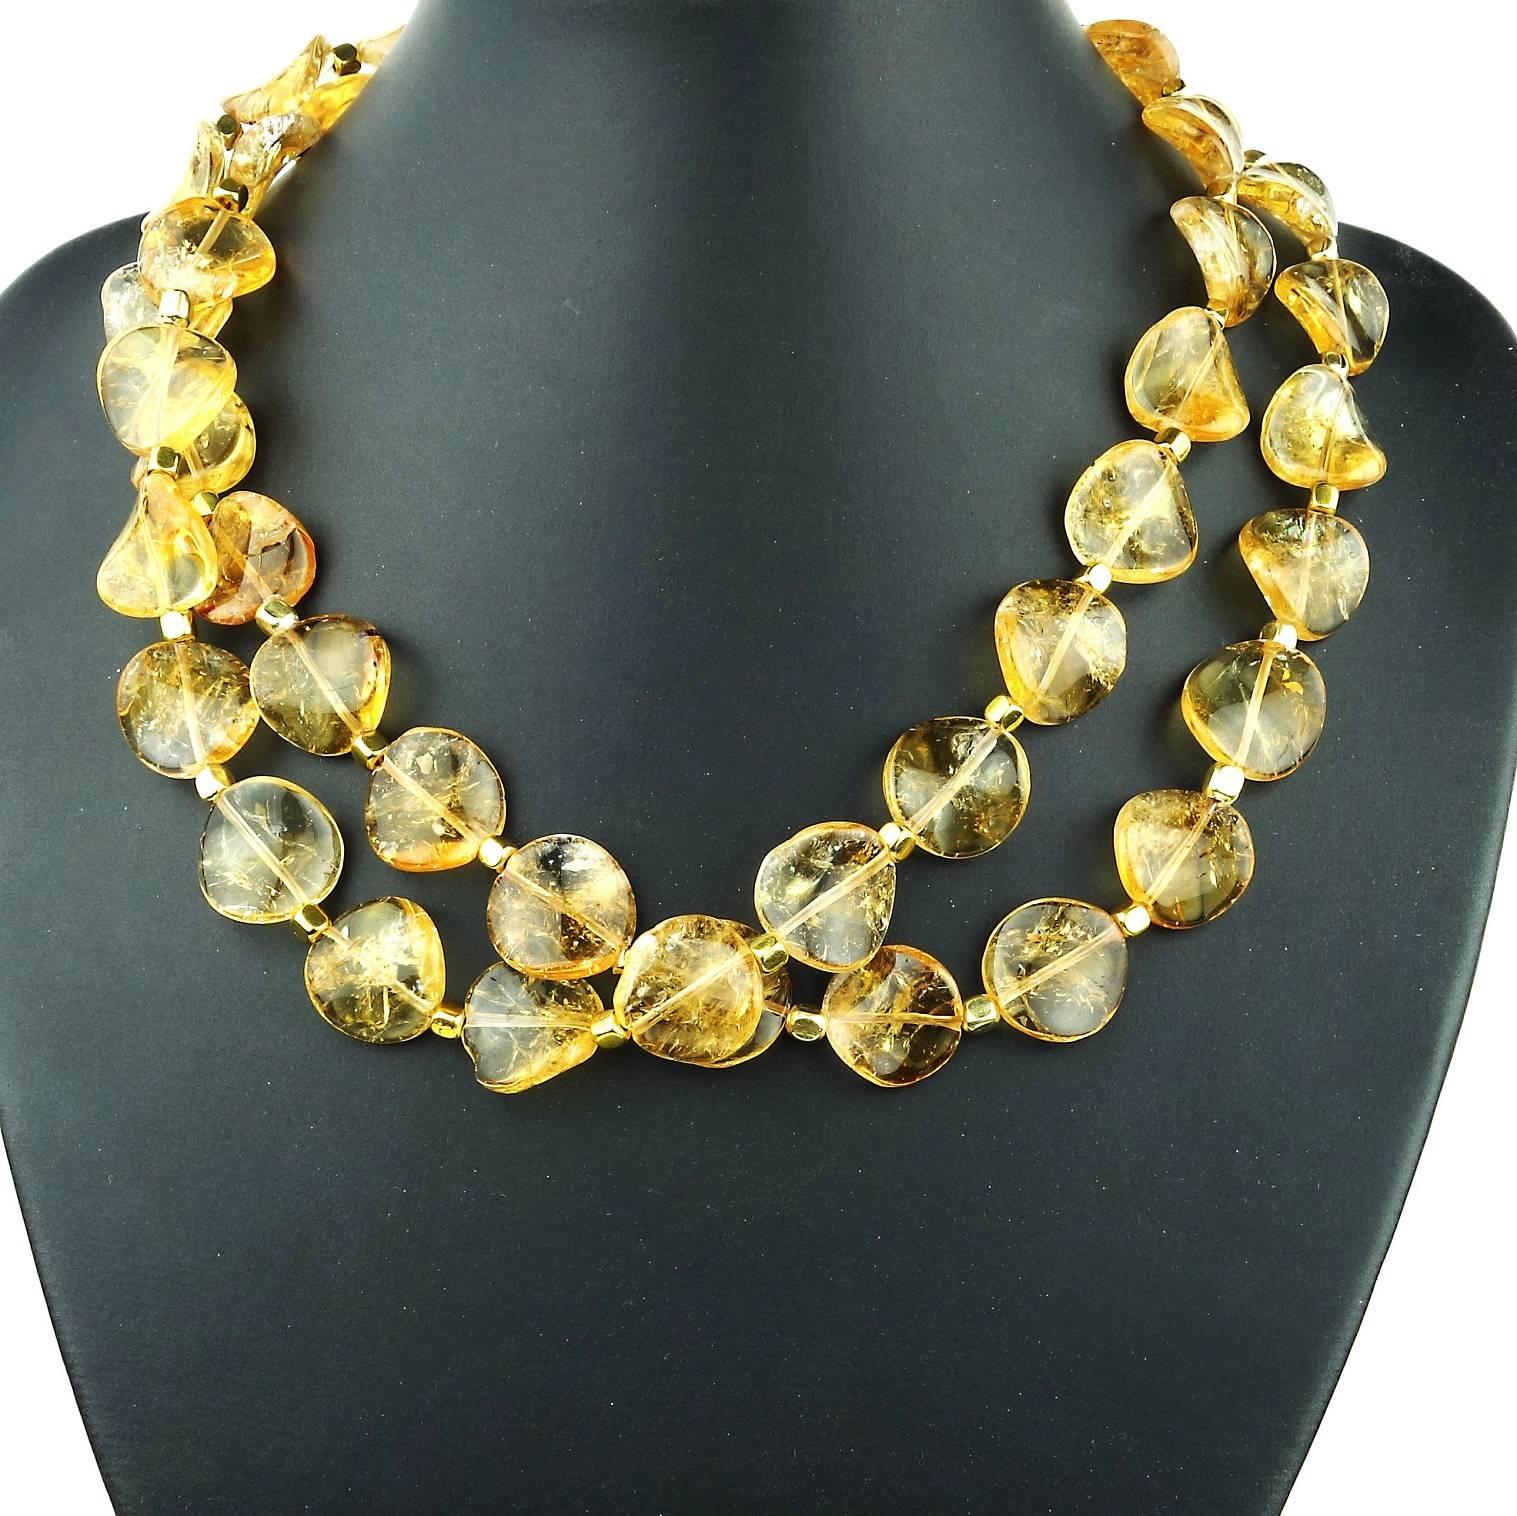 Glowing Citrine Double Strand Necklace 5